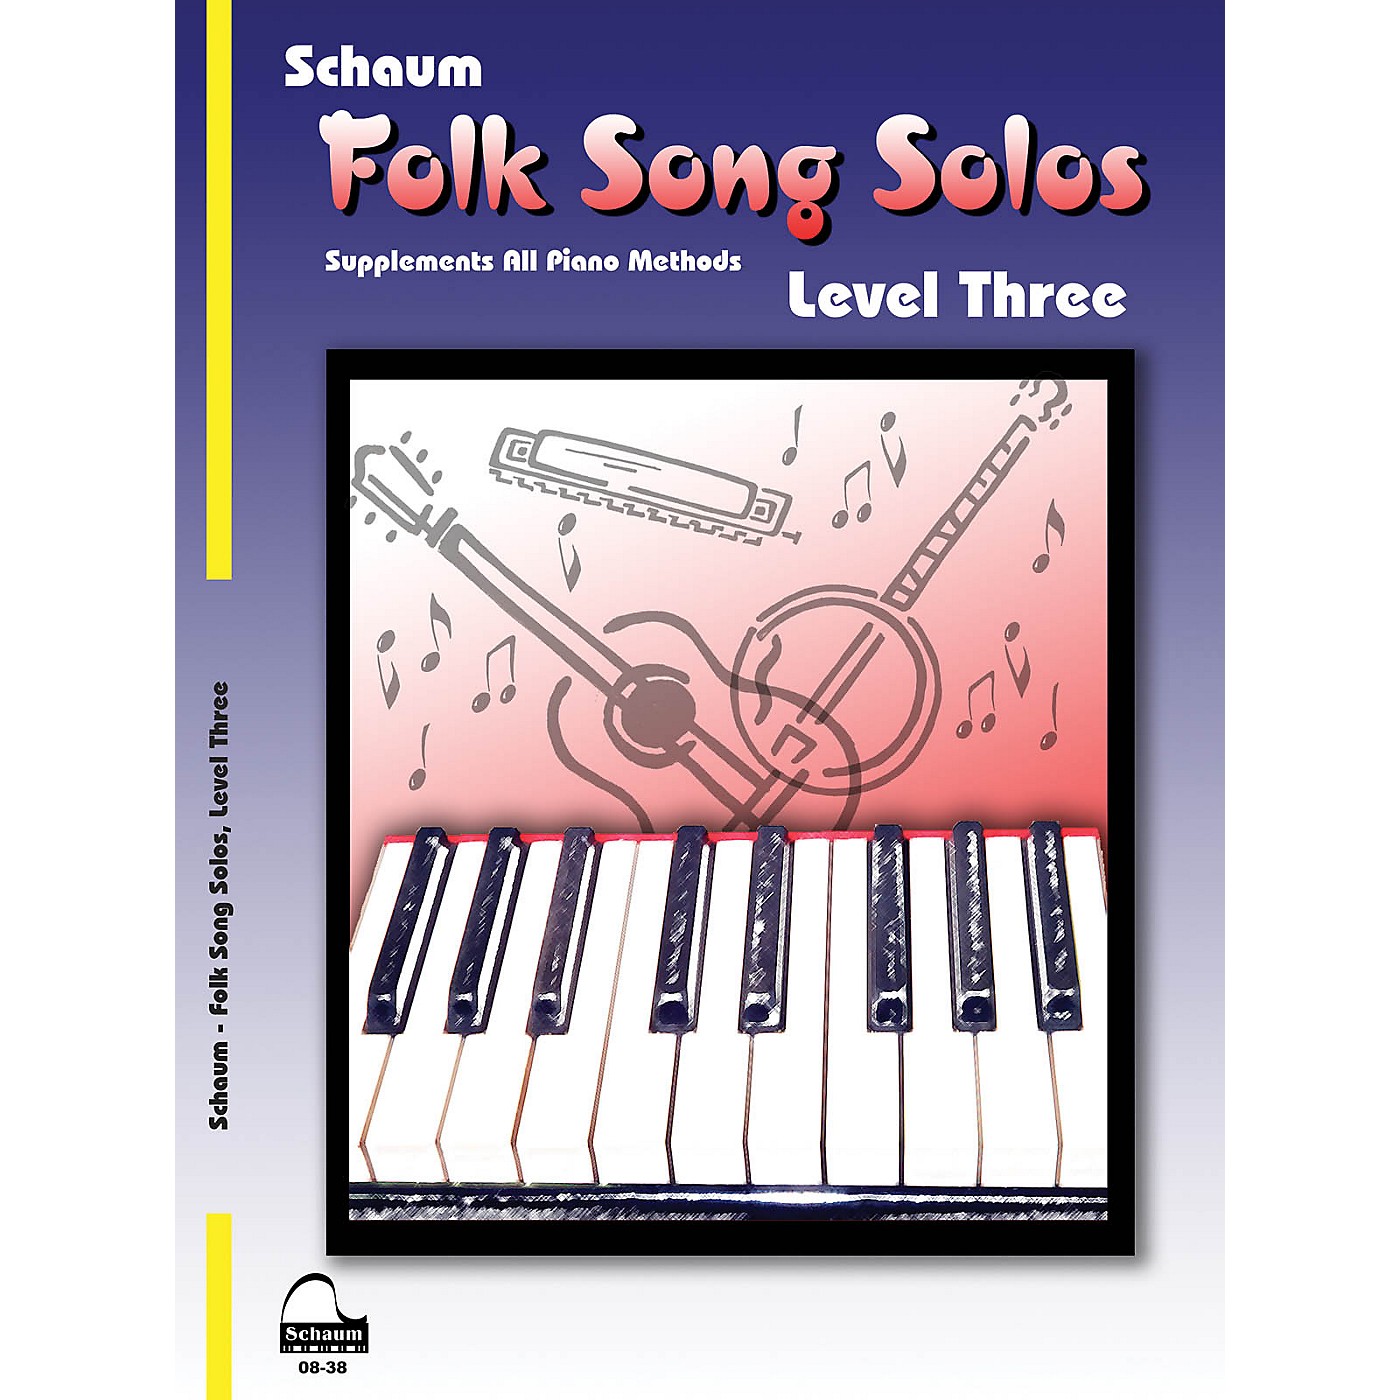 Schaum Folk Song Solos (Level 3) Educational Piano Book (Level Early Inter) thumbnail